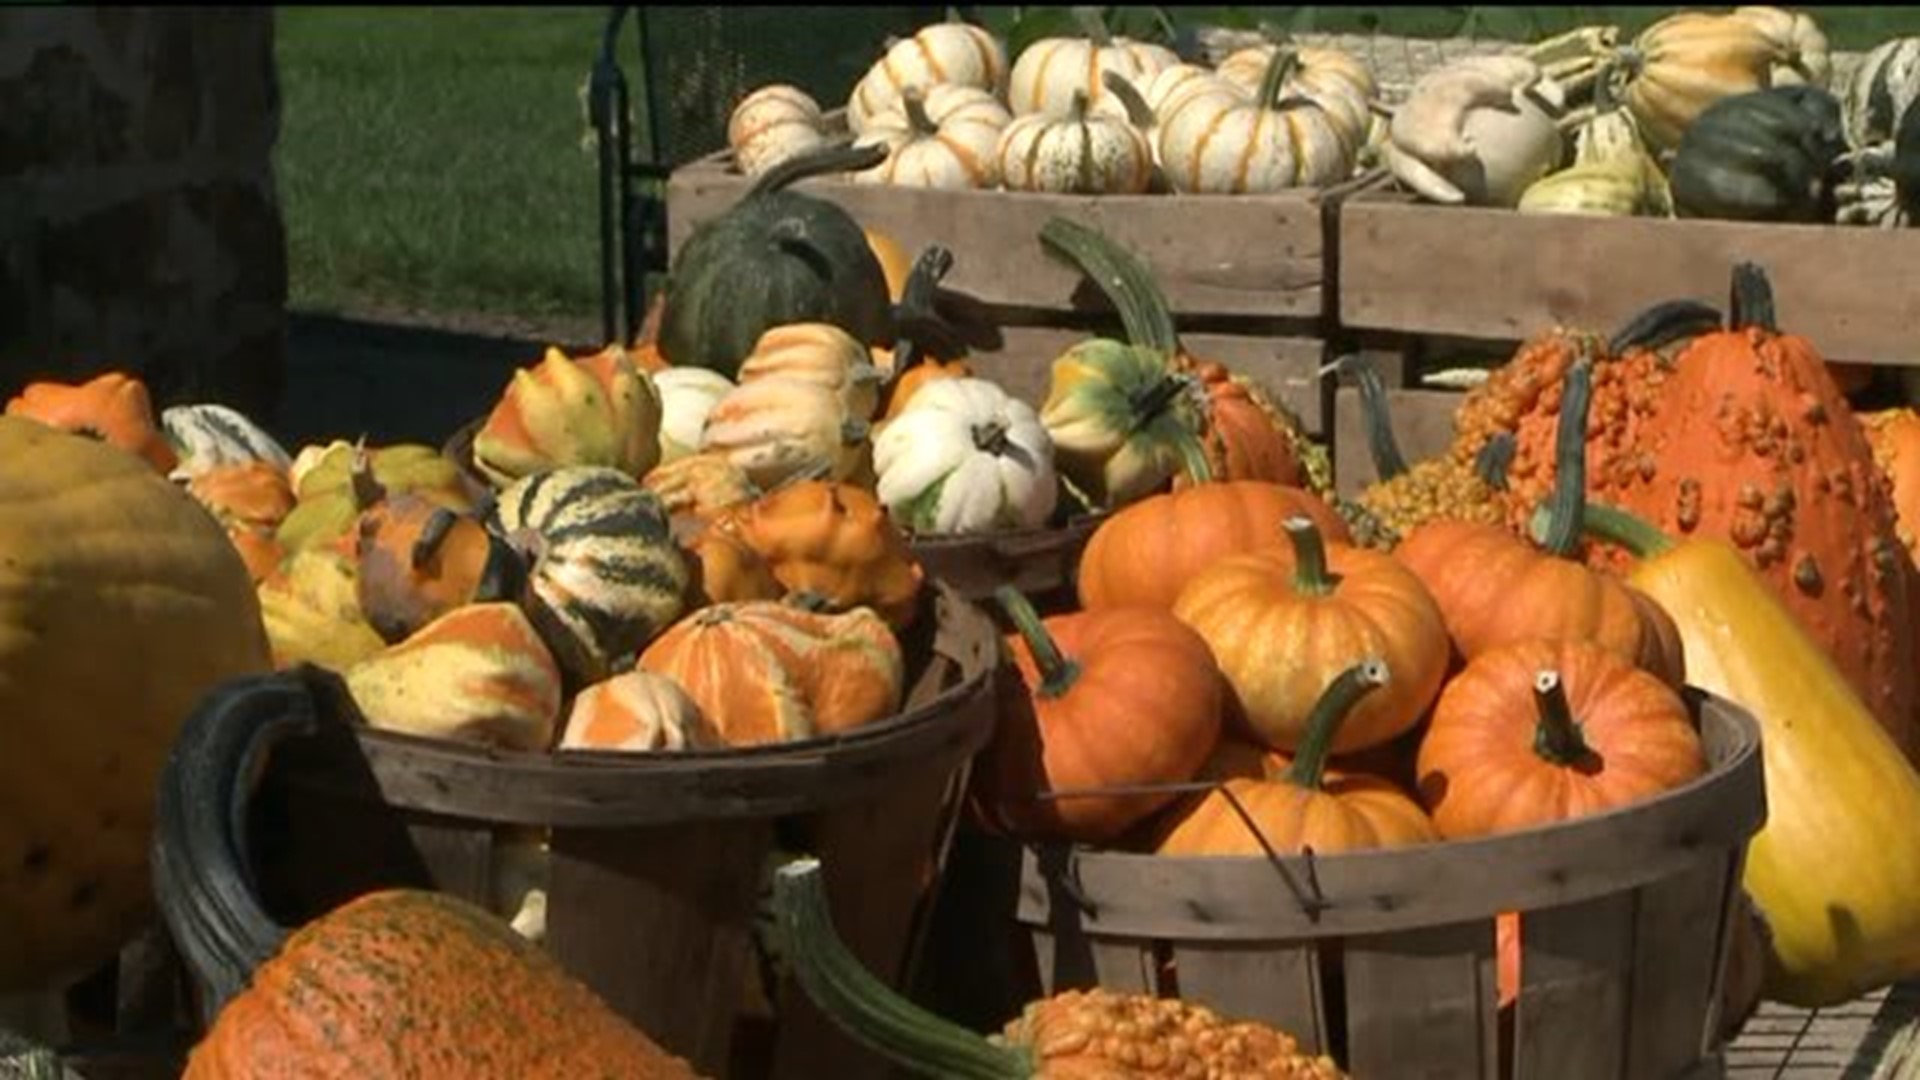 Farmers Say Pumpkins Are Ripe for the Picking